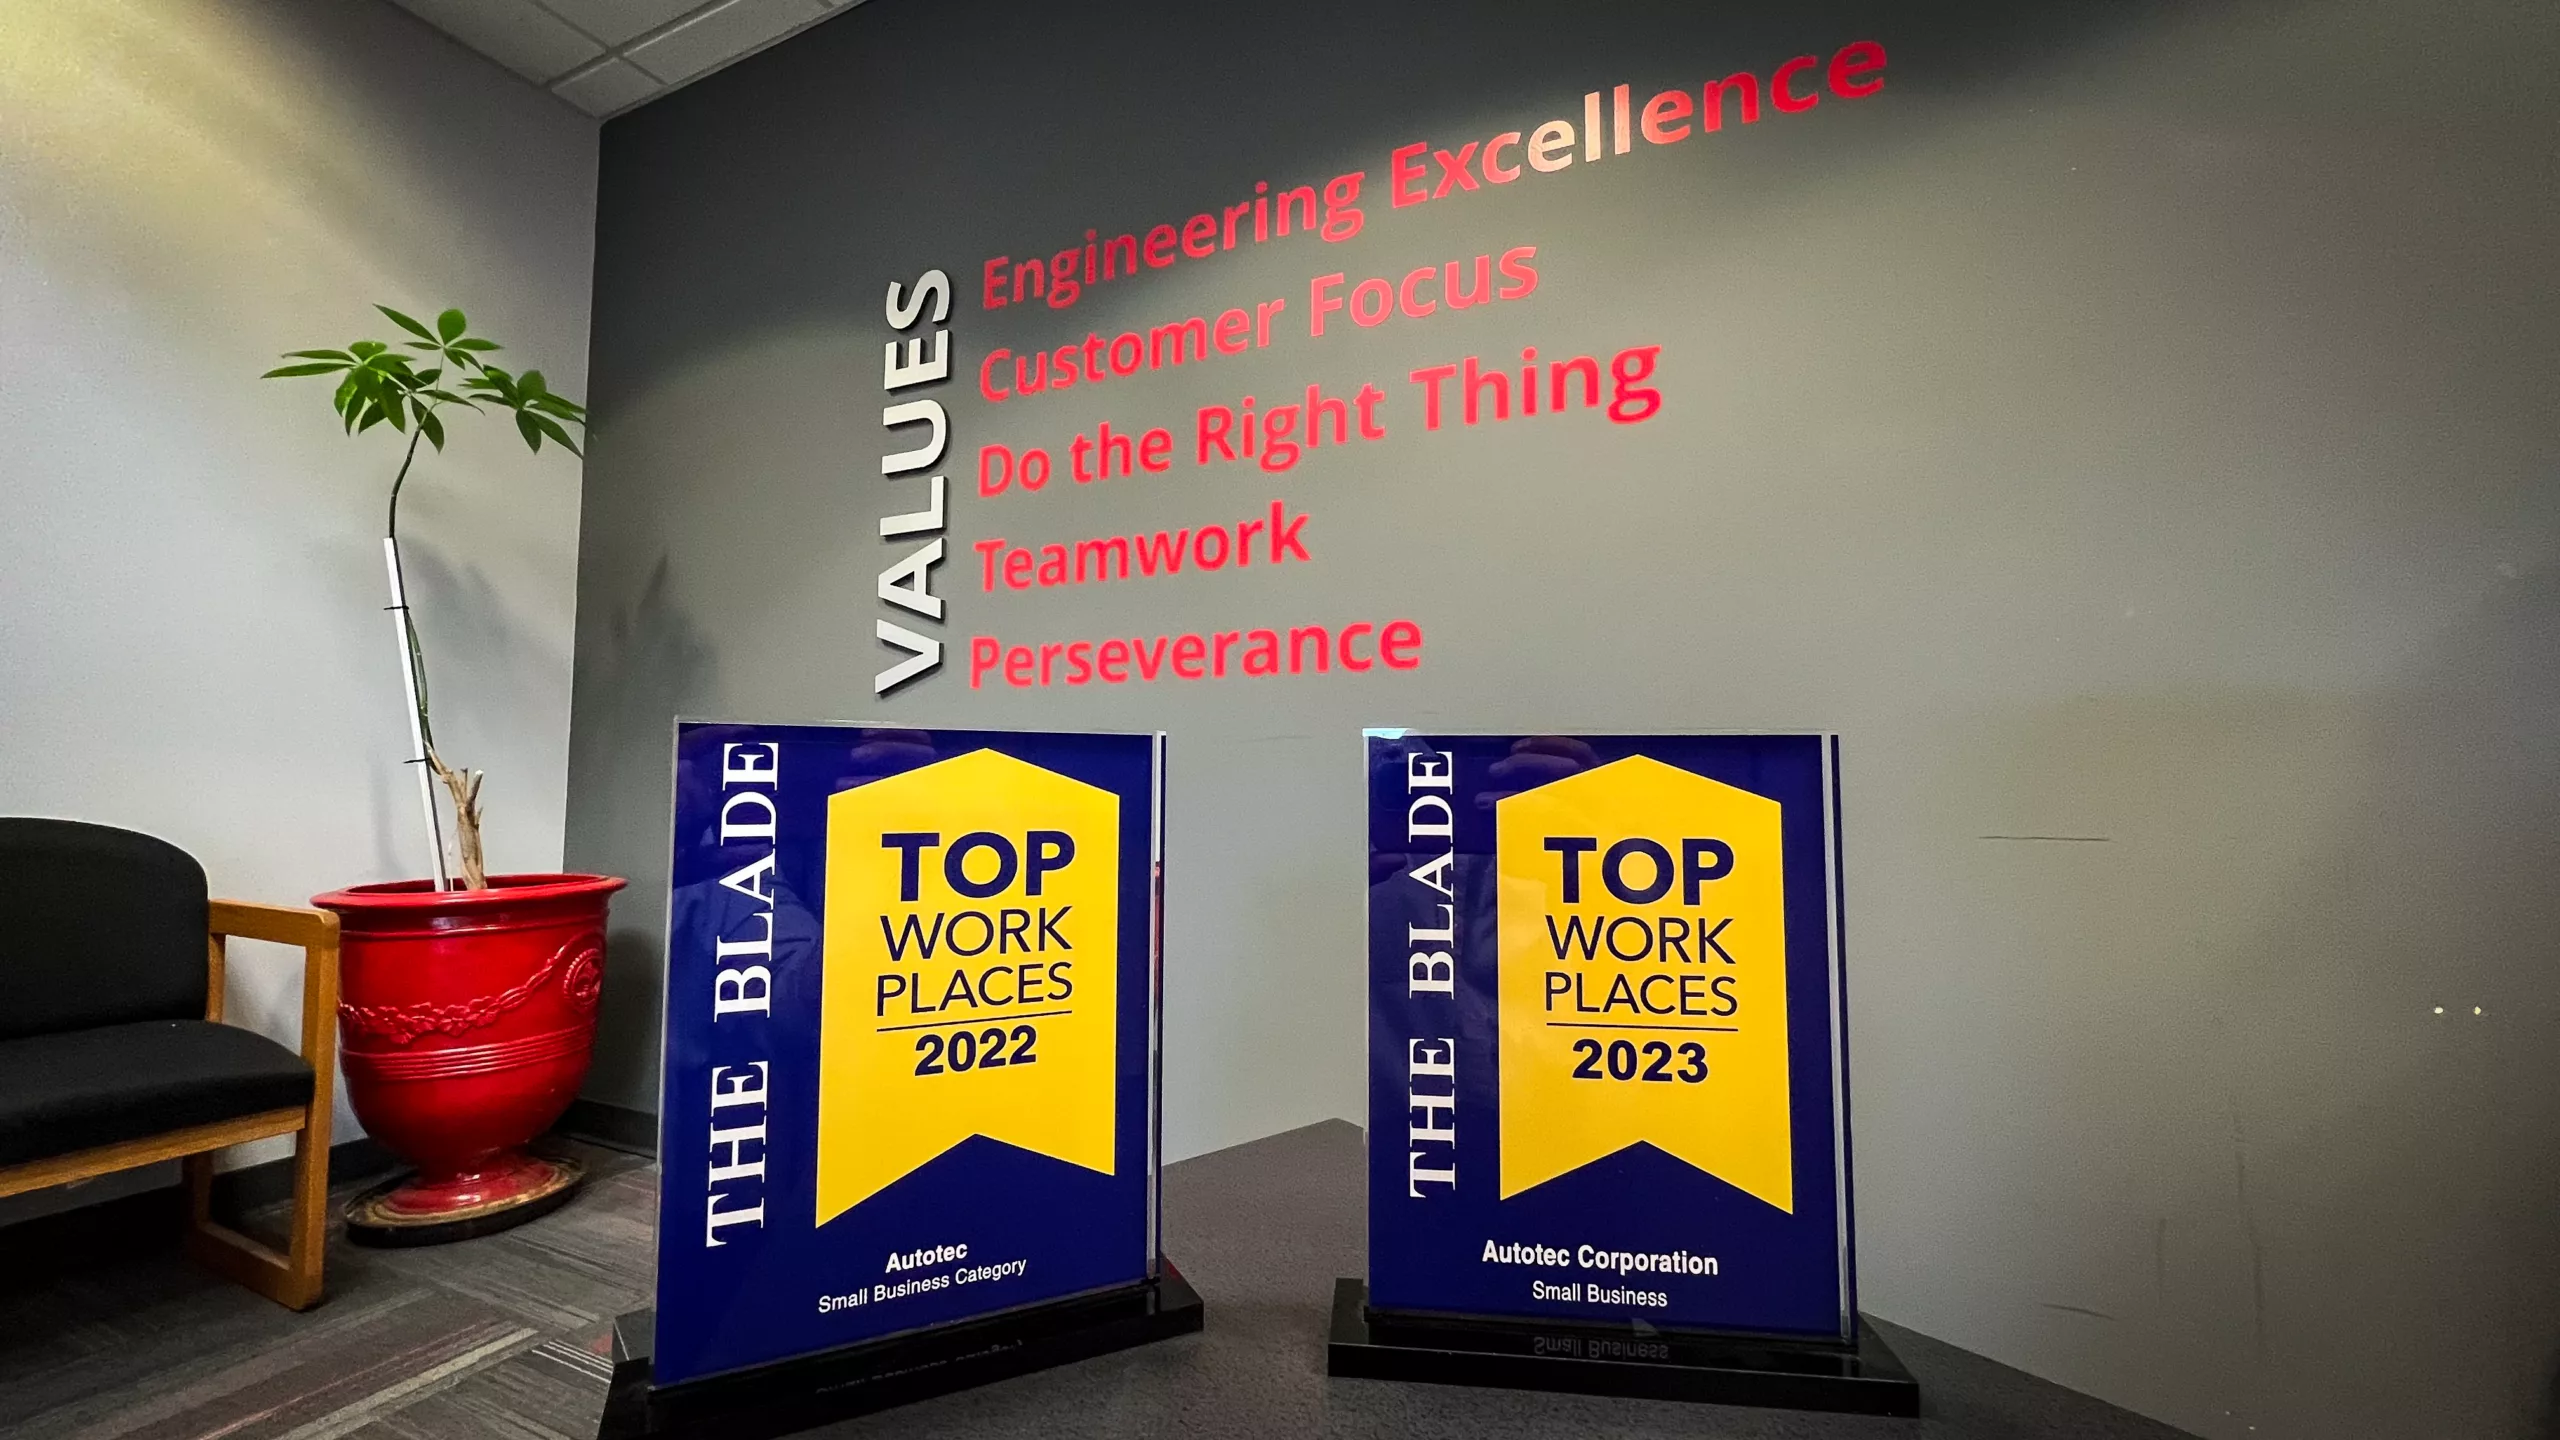 Autotec Values Statement with Top workplace awards